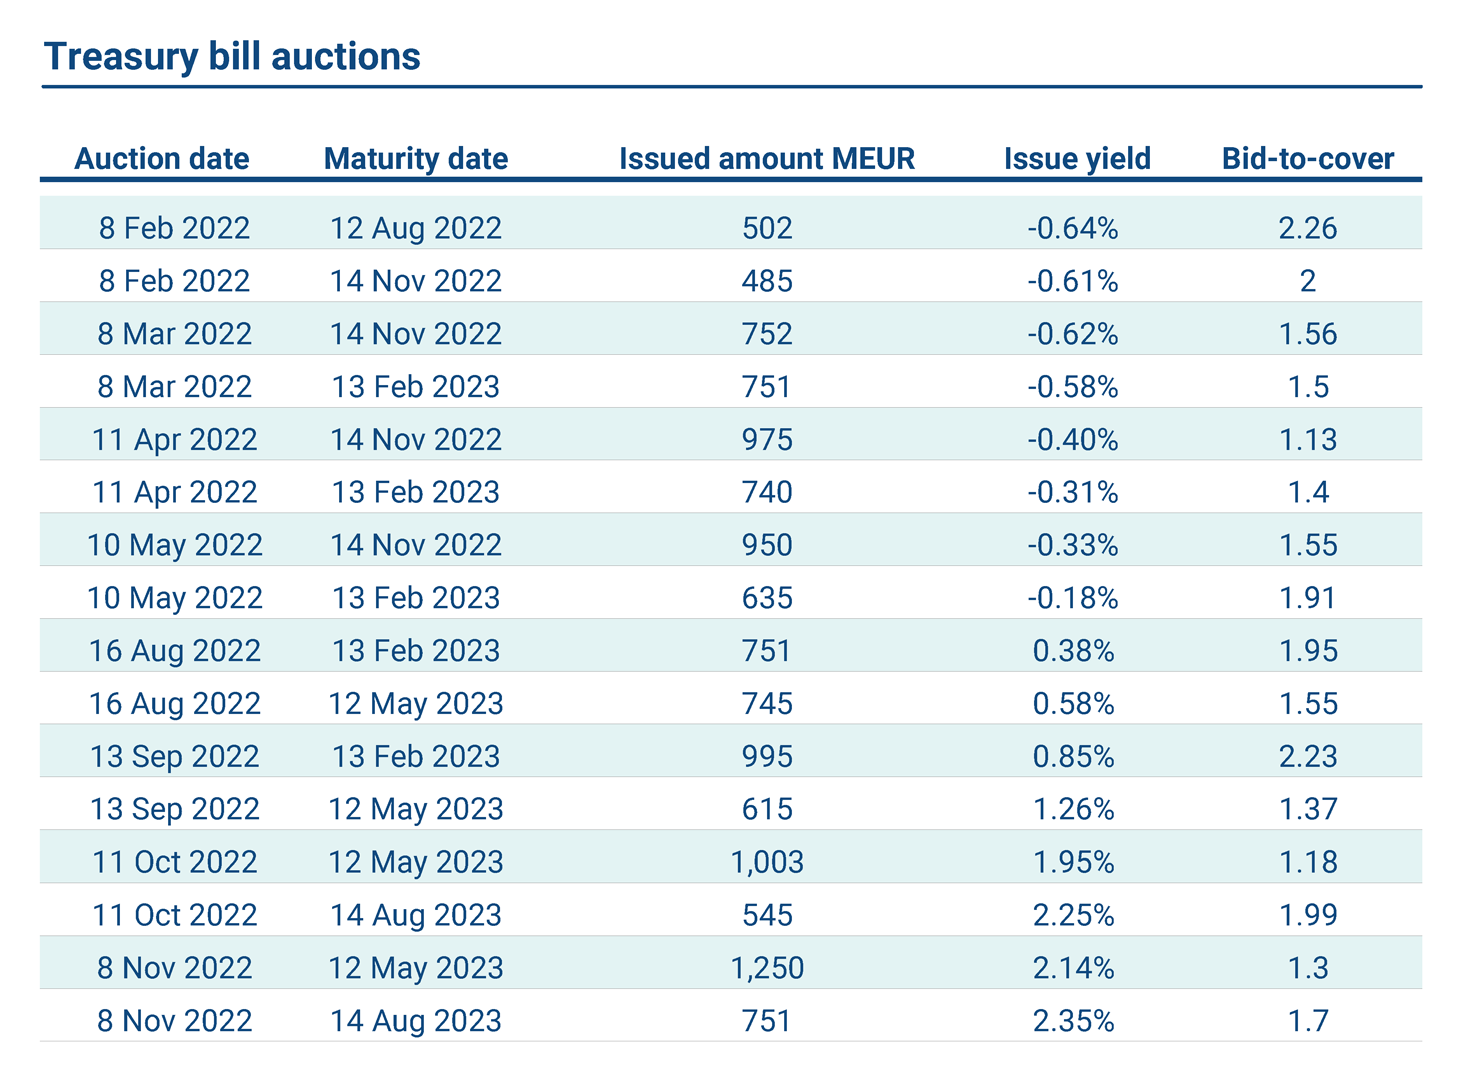 The table shows Treasury bill auctions in 2022.